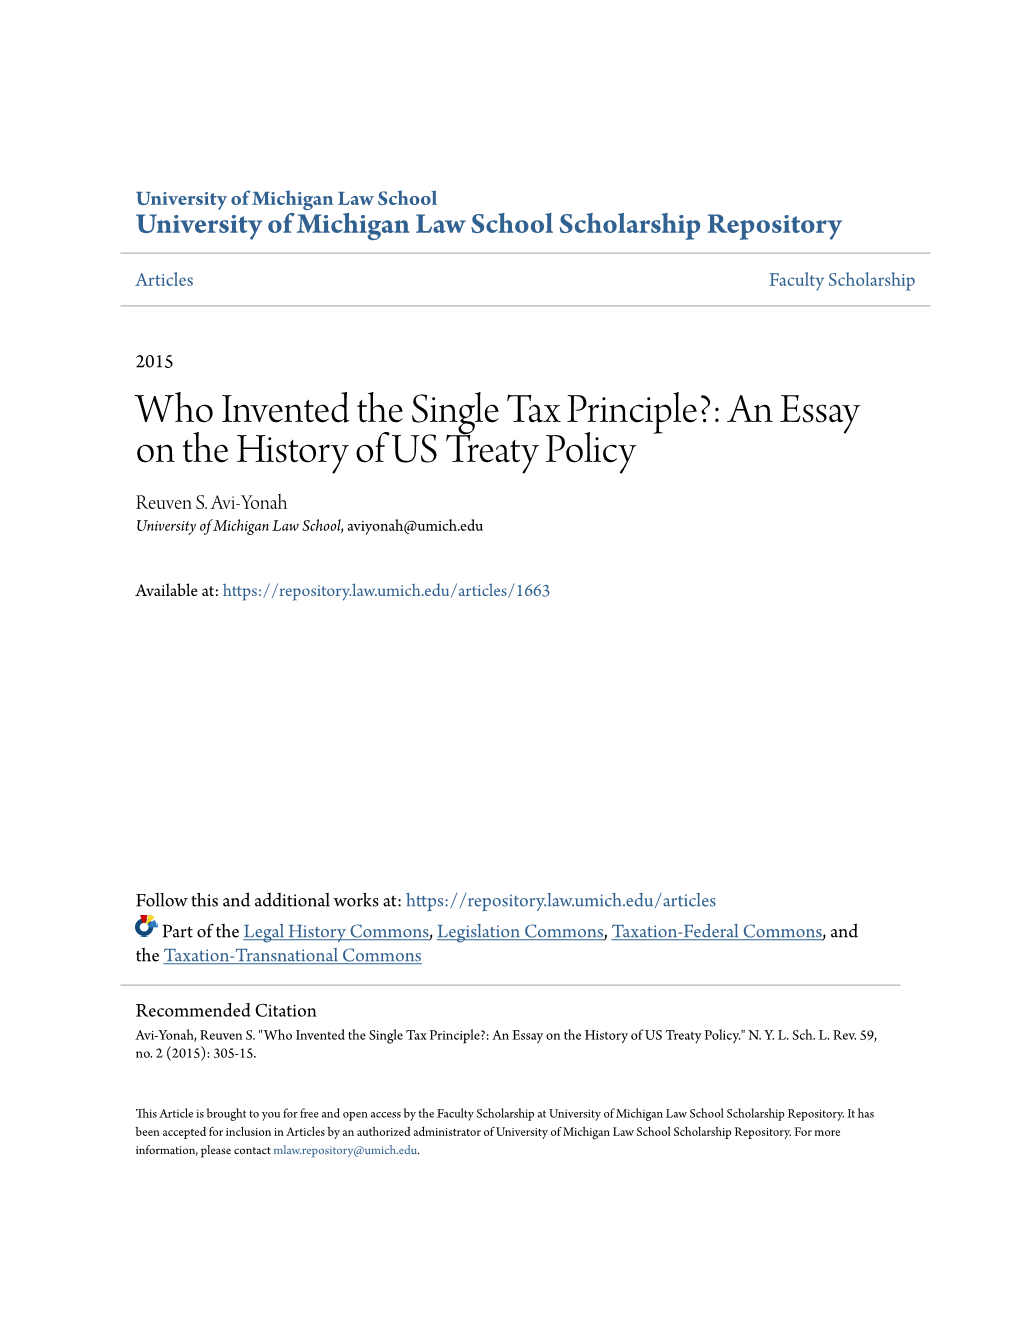 Who Invented the Single Tax Principle?: an Essay on the History of US Treaty Policy Reuven S